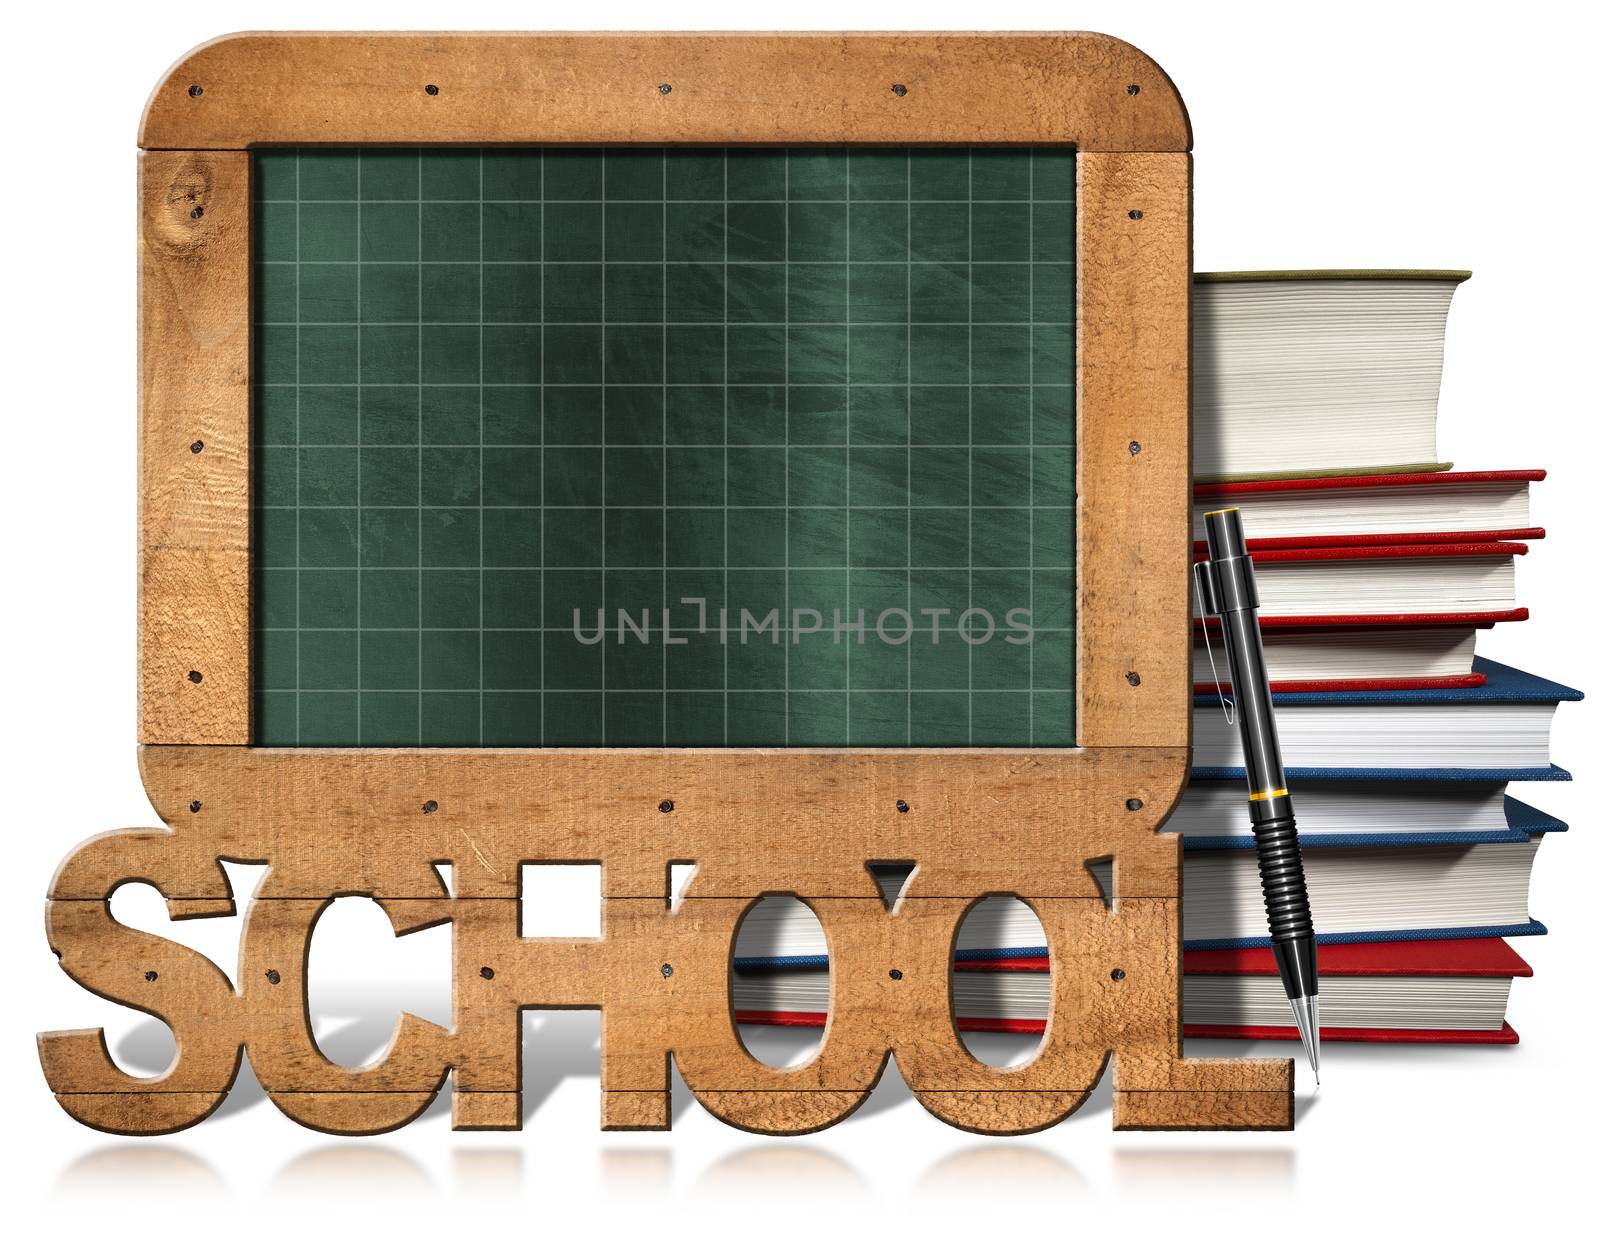 Old empty and green blackboard with wooden rectangular frame, text School, books, and pencil. Isolated on white background